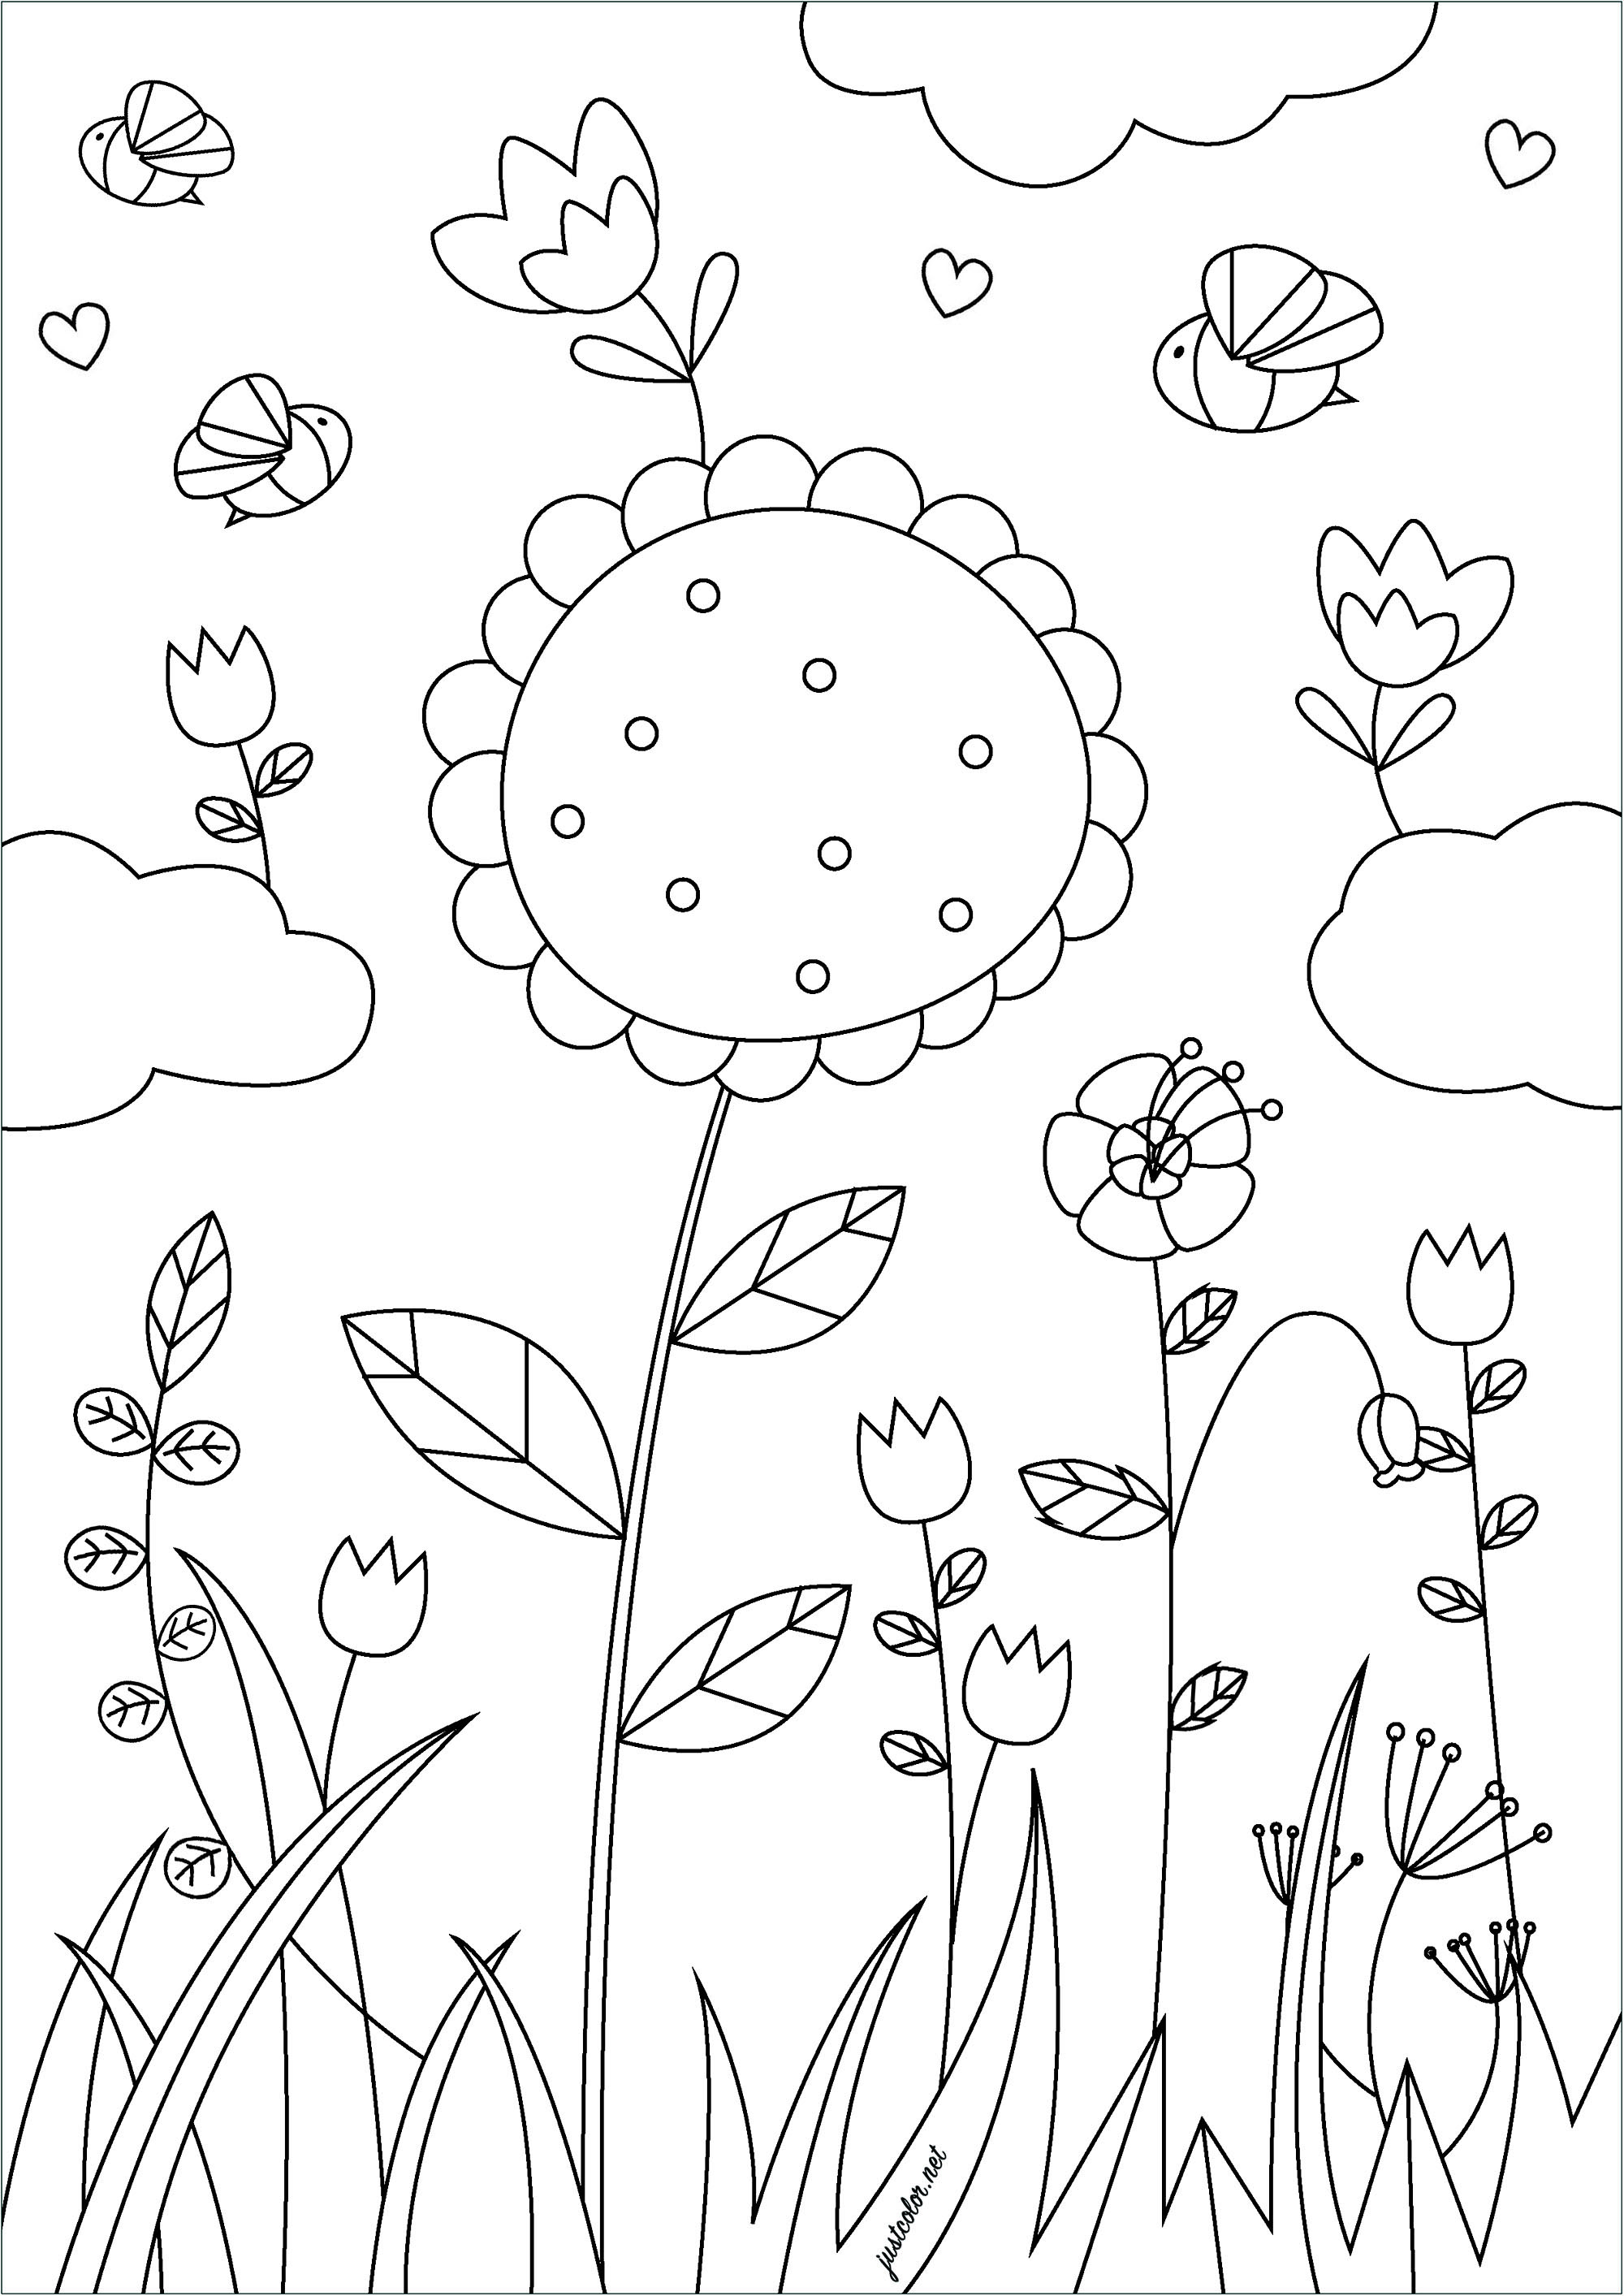 Pretty flowers in the wind. This coloring page called 'Spring Flowers' features several flowers blooming in a field of greenery, Artist : Gaelle Picard